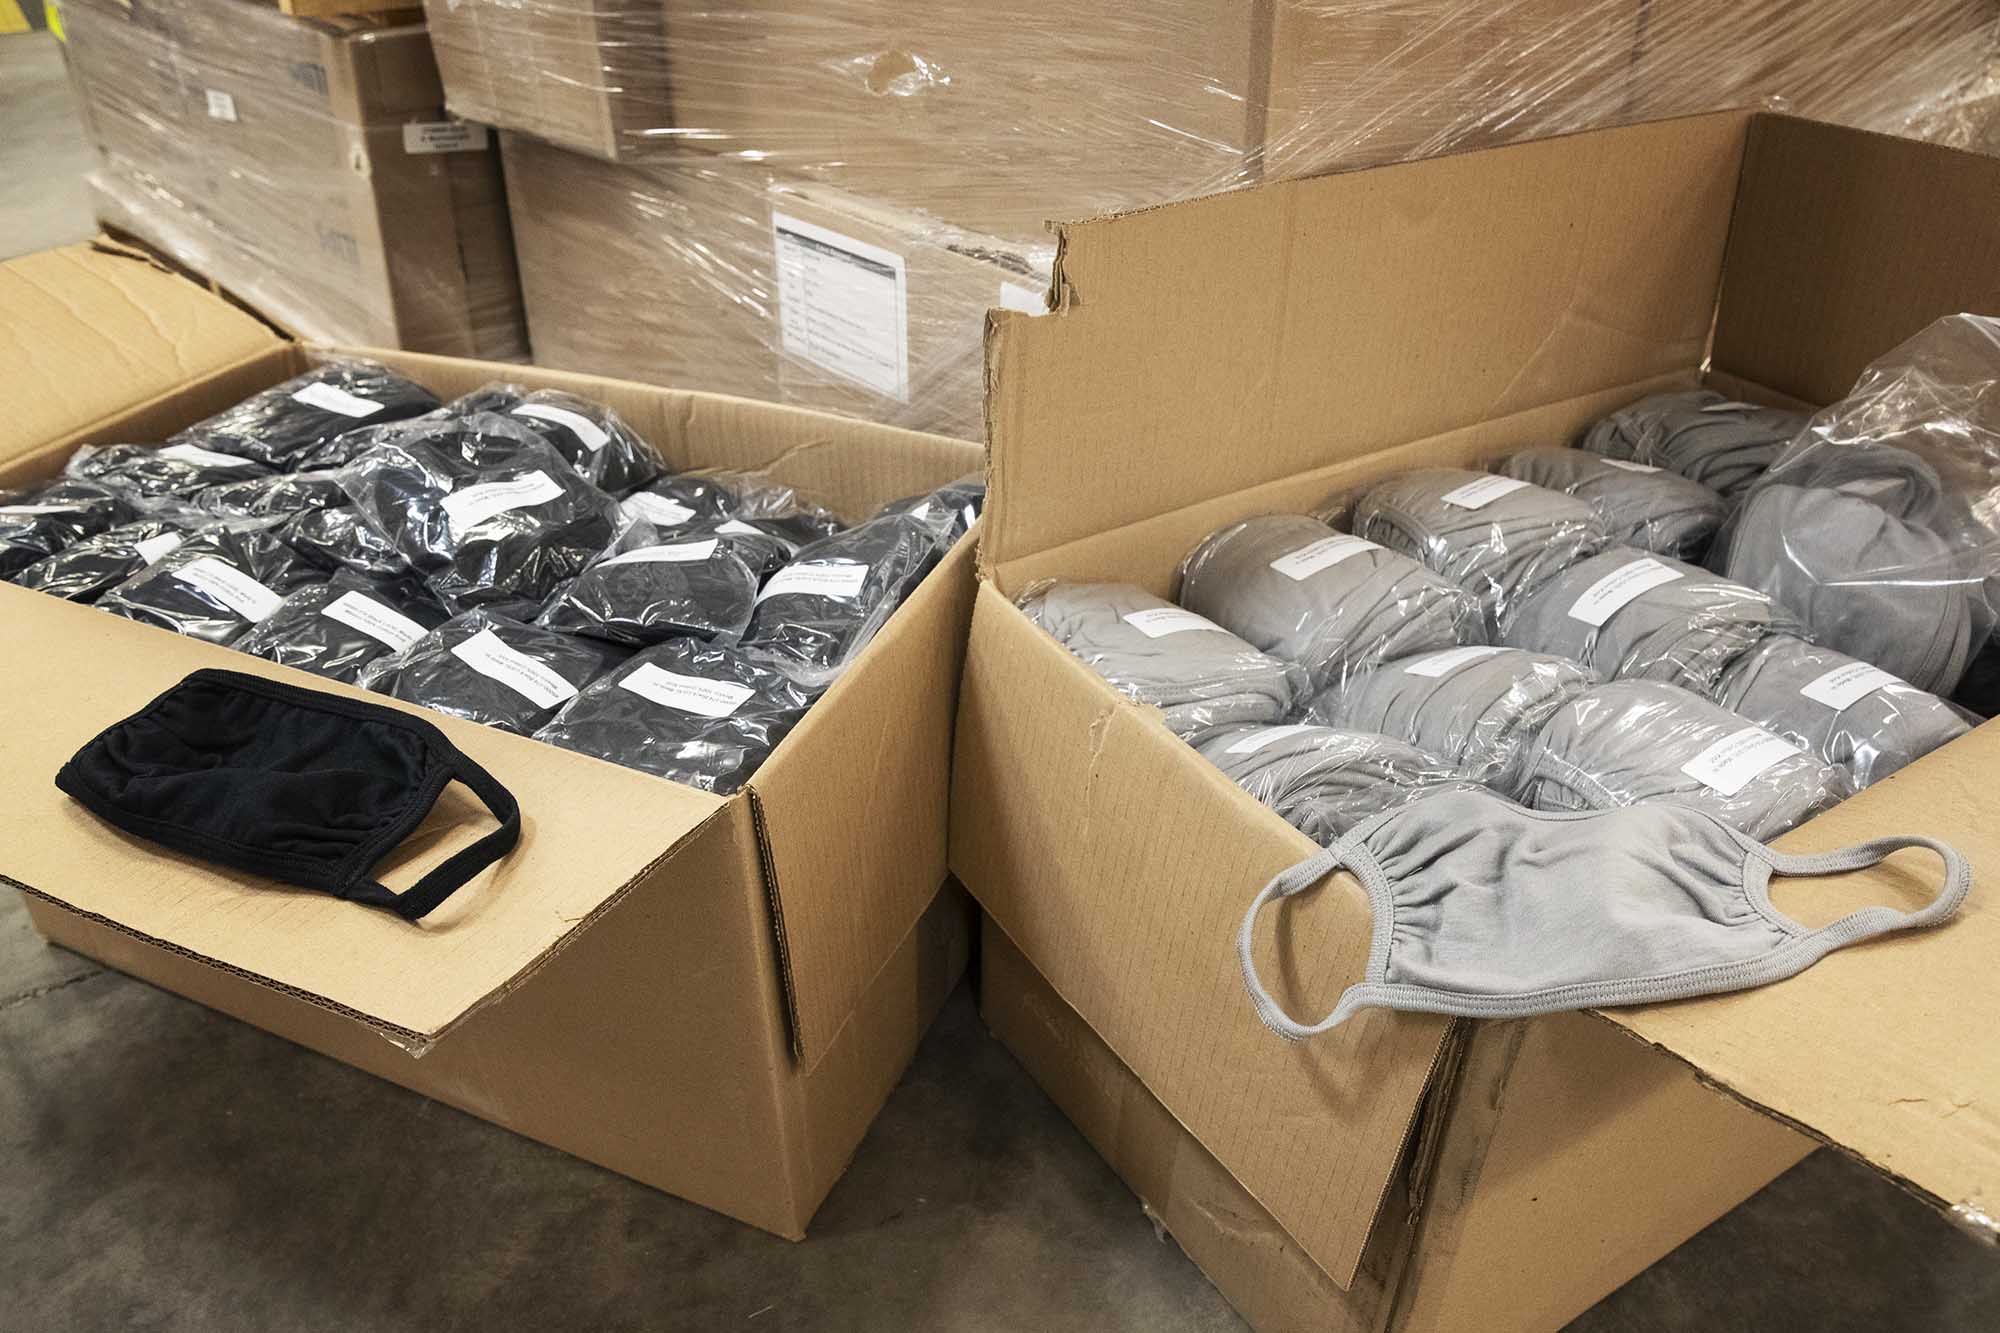 Boxes filled with thousands of gray and black masks